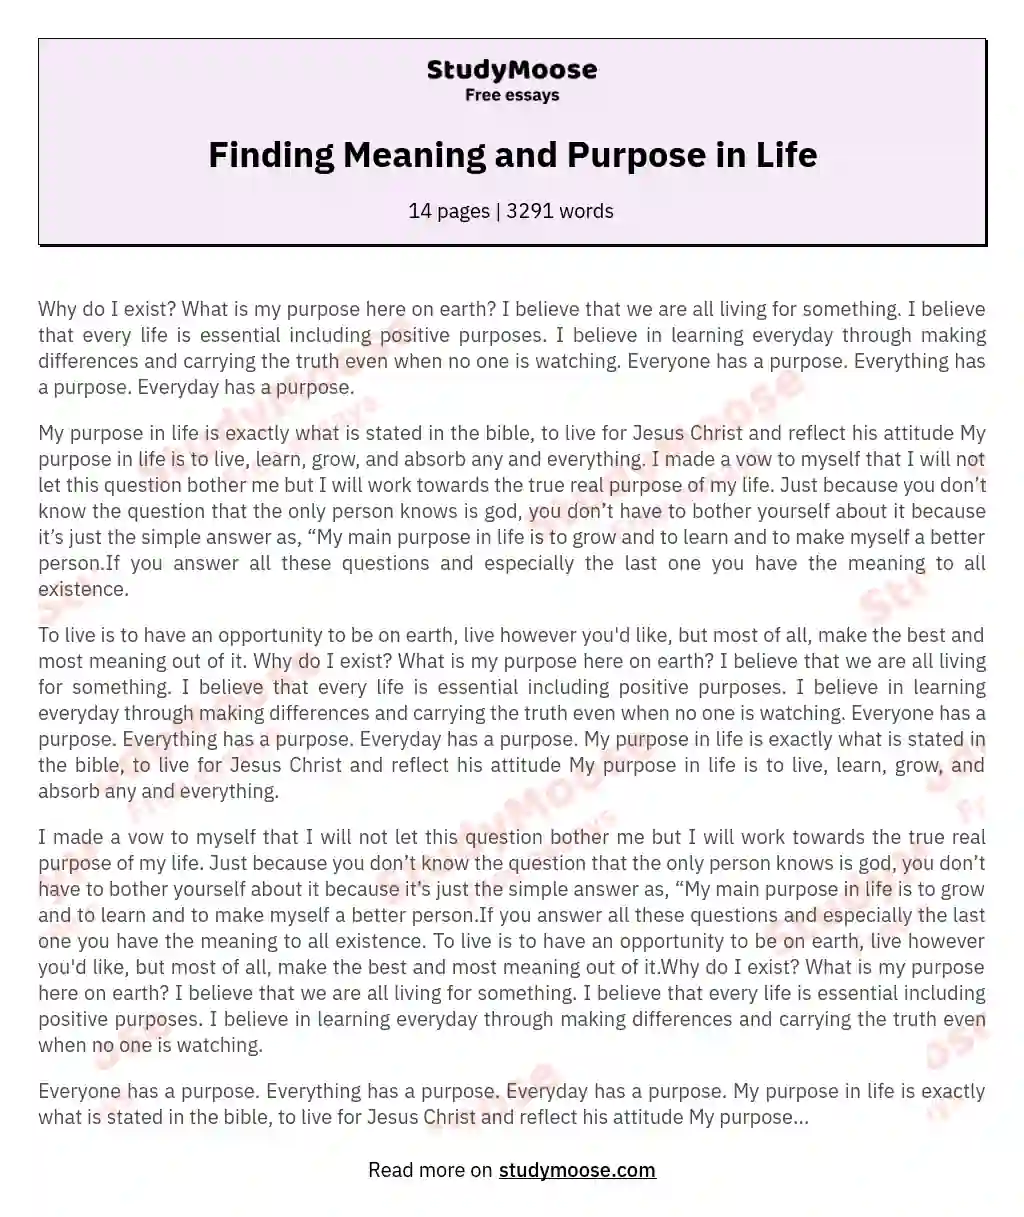 Finding Meaning and Purpose in Life essay